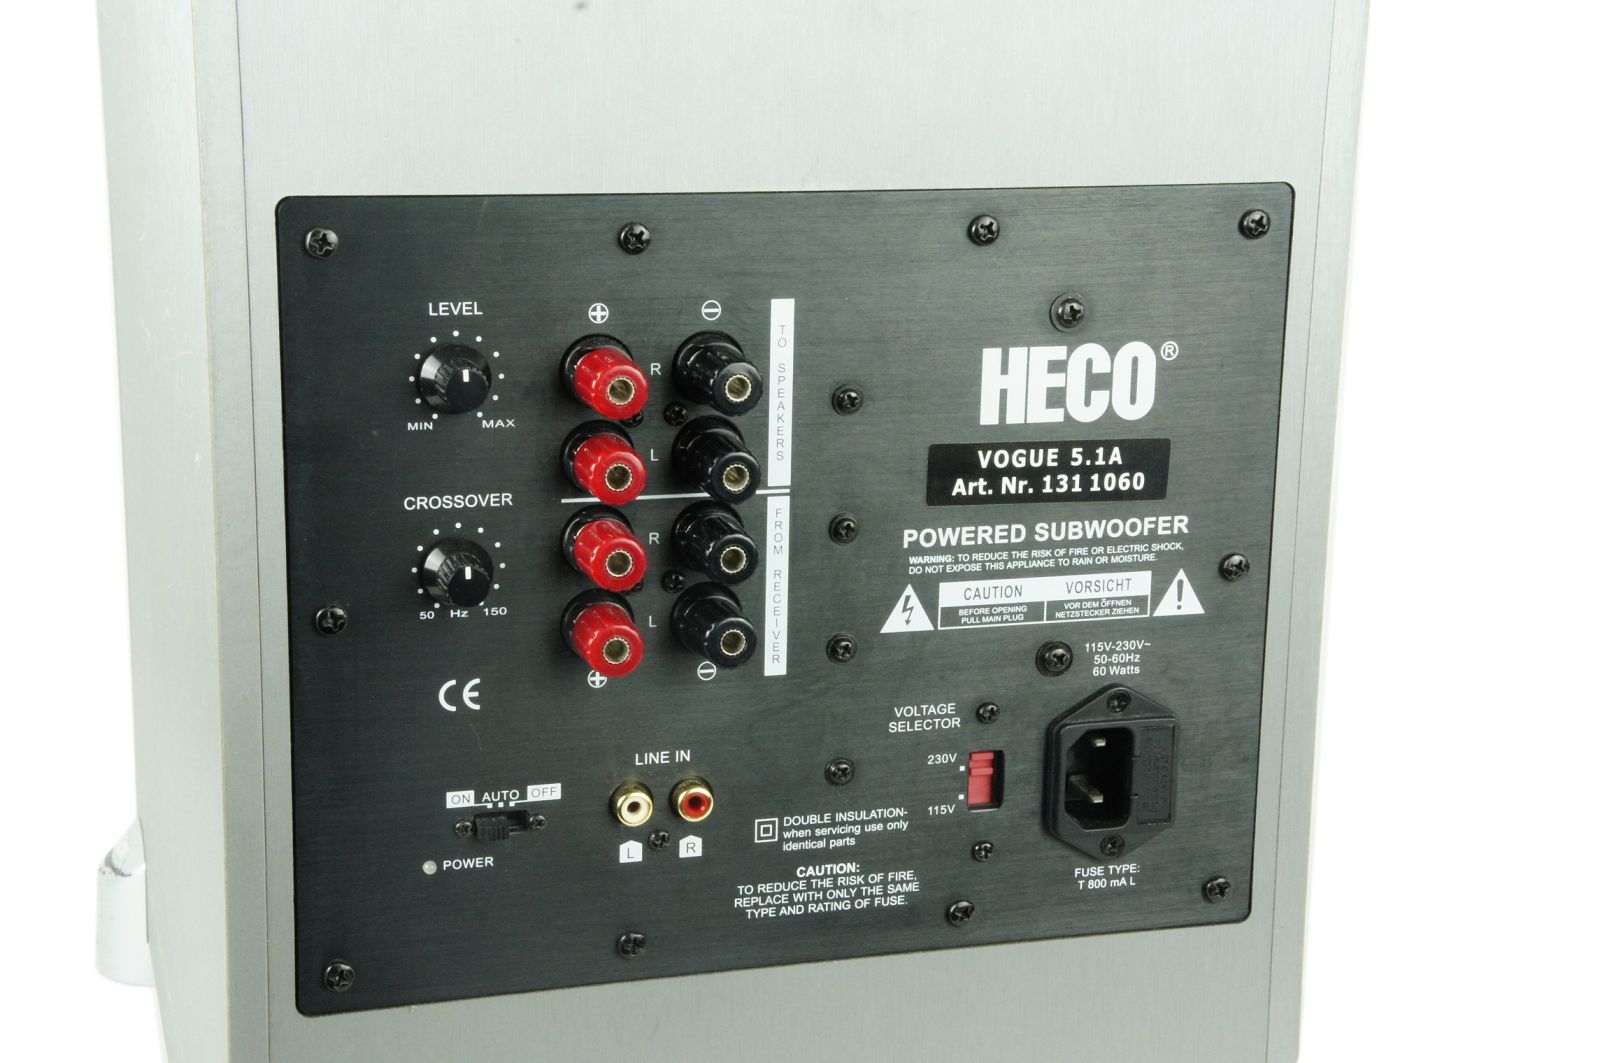 HECO_Powered_Subwoofer_Vogue_5.1A_06